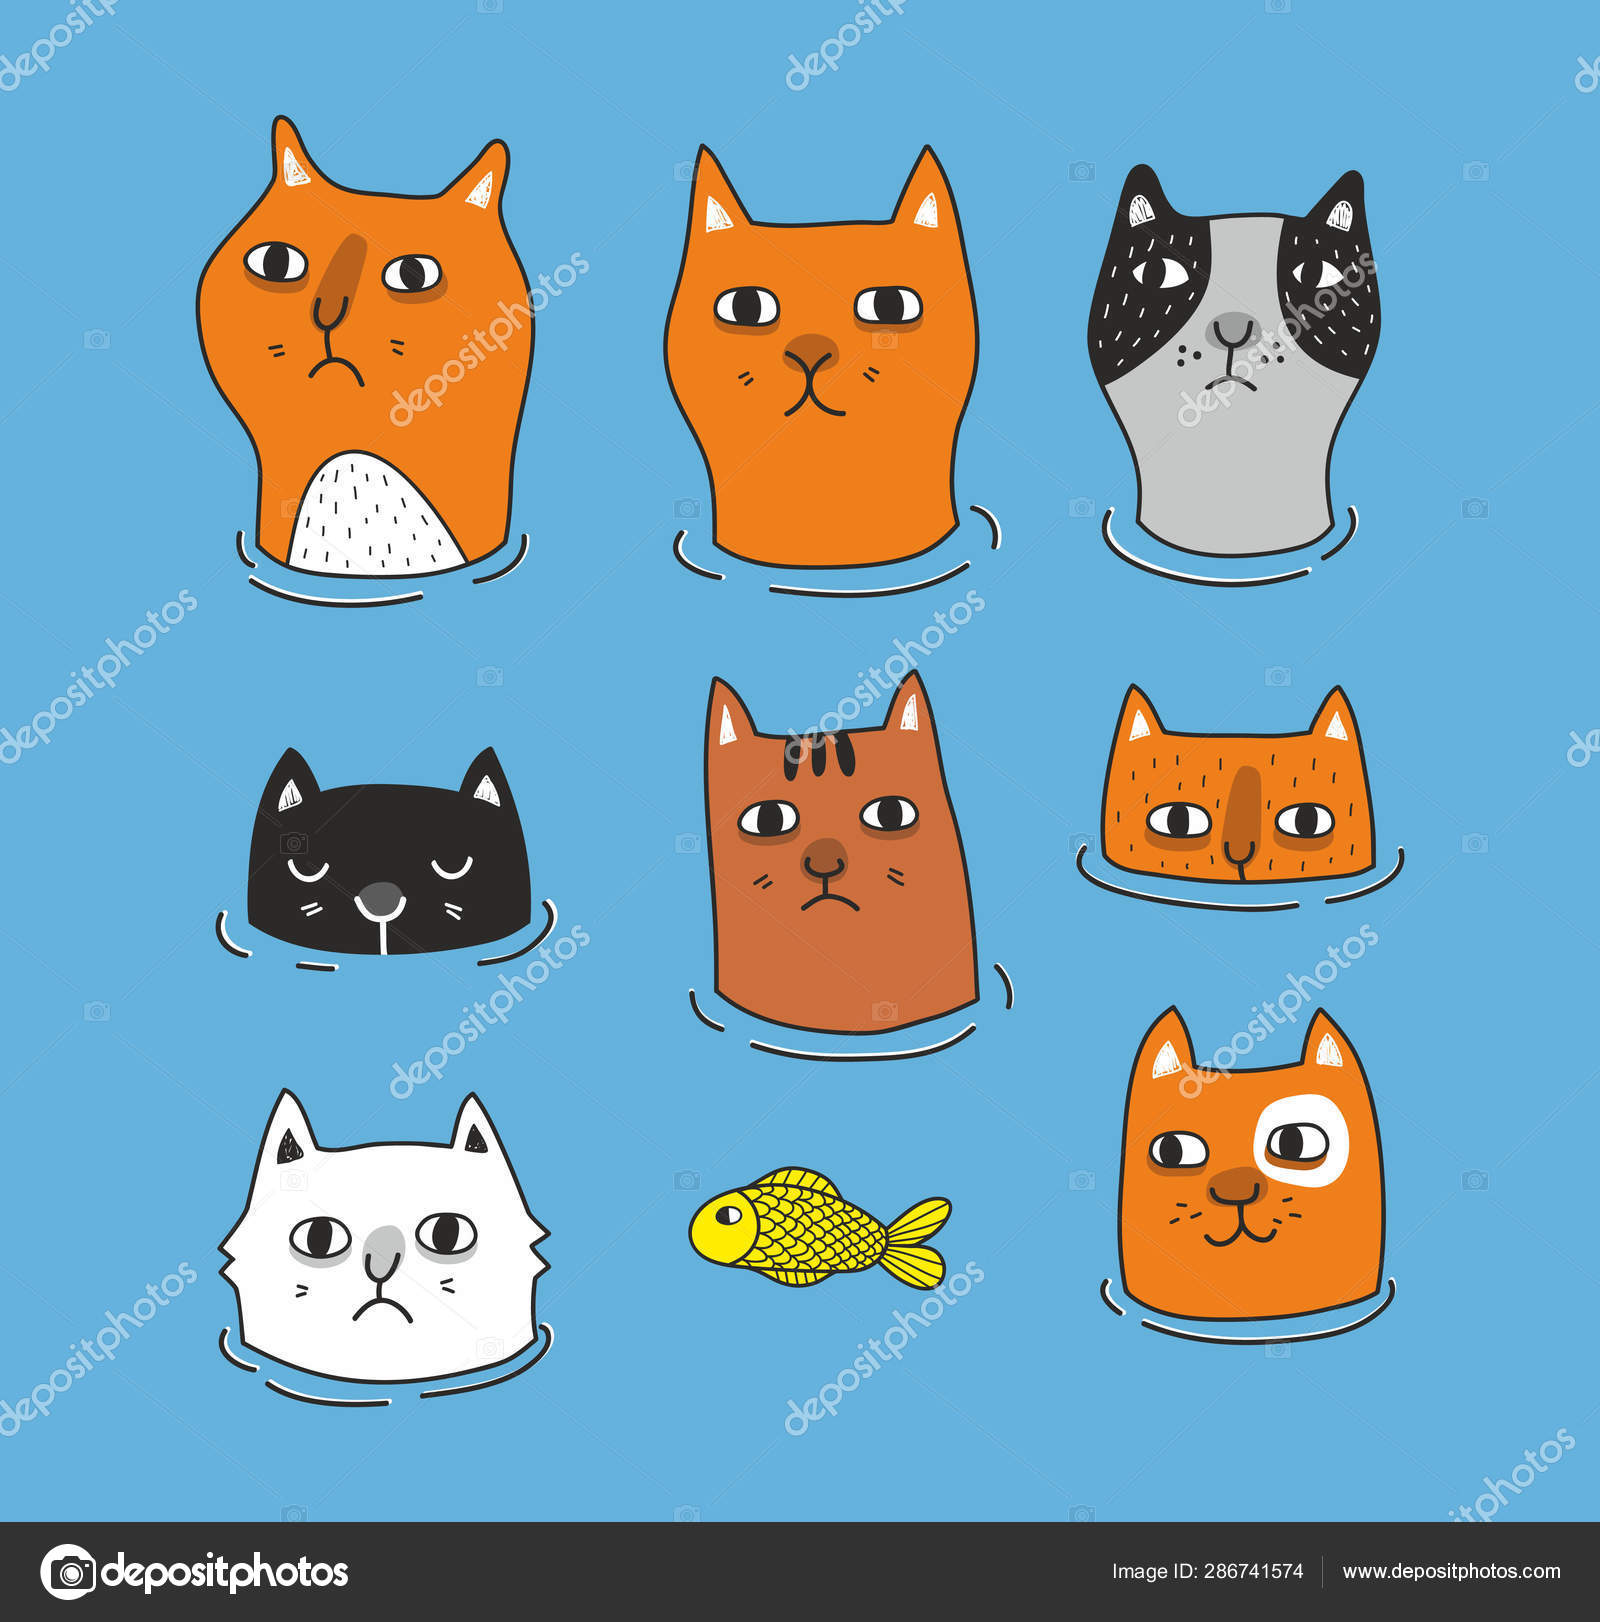 Cartoon Illustration of funny Cats ot Kittens Heads Collection Set